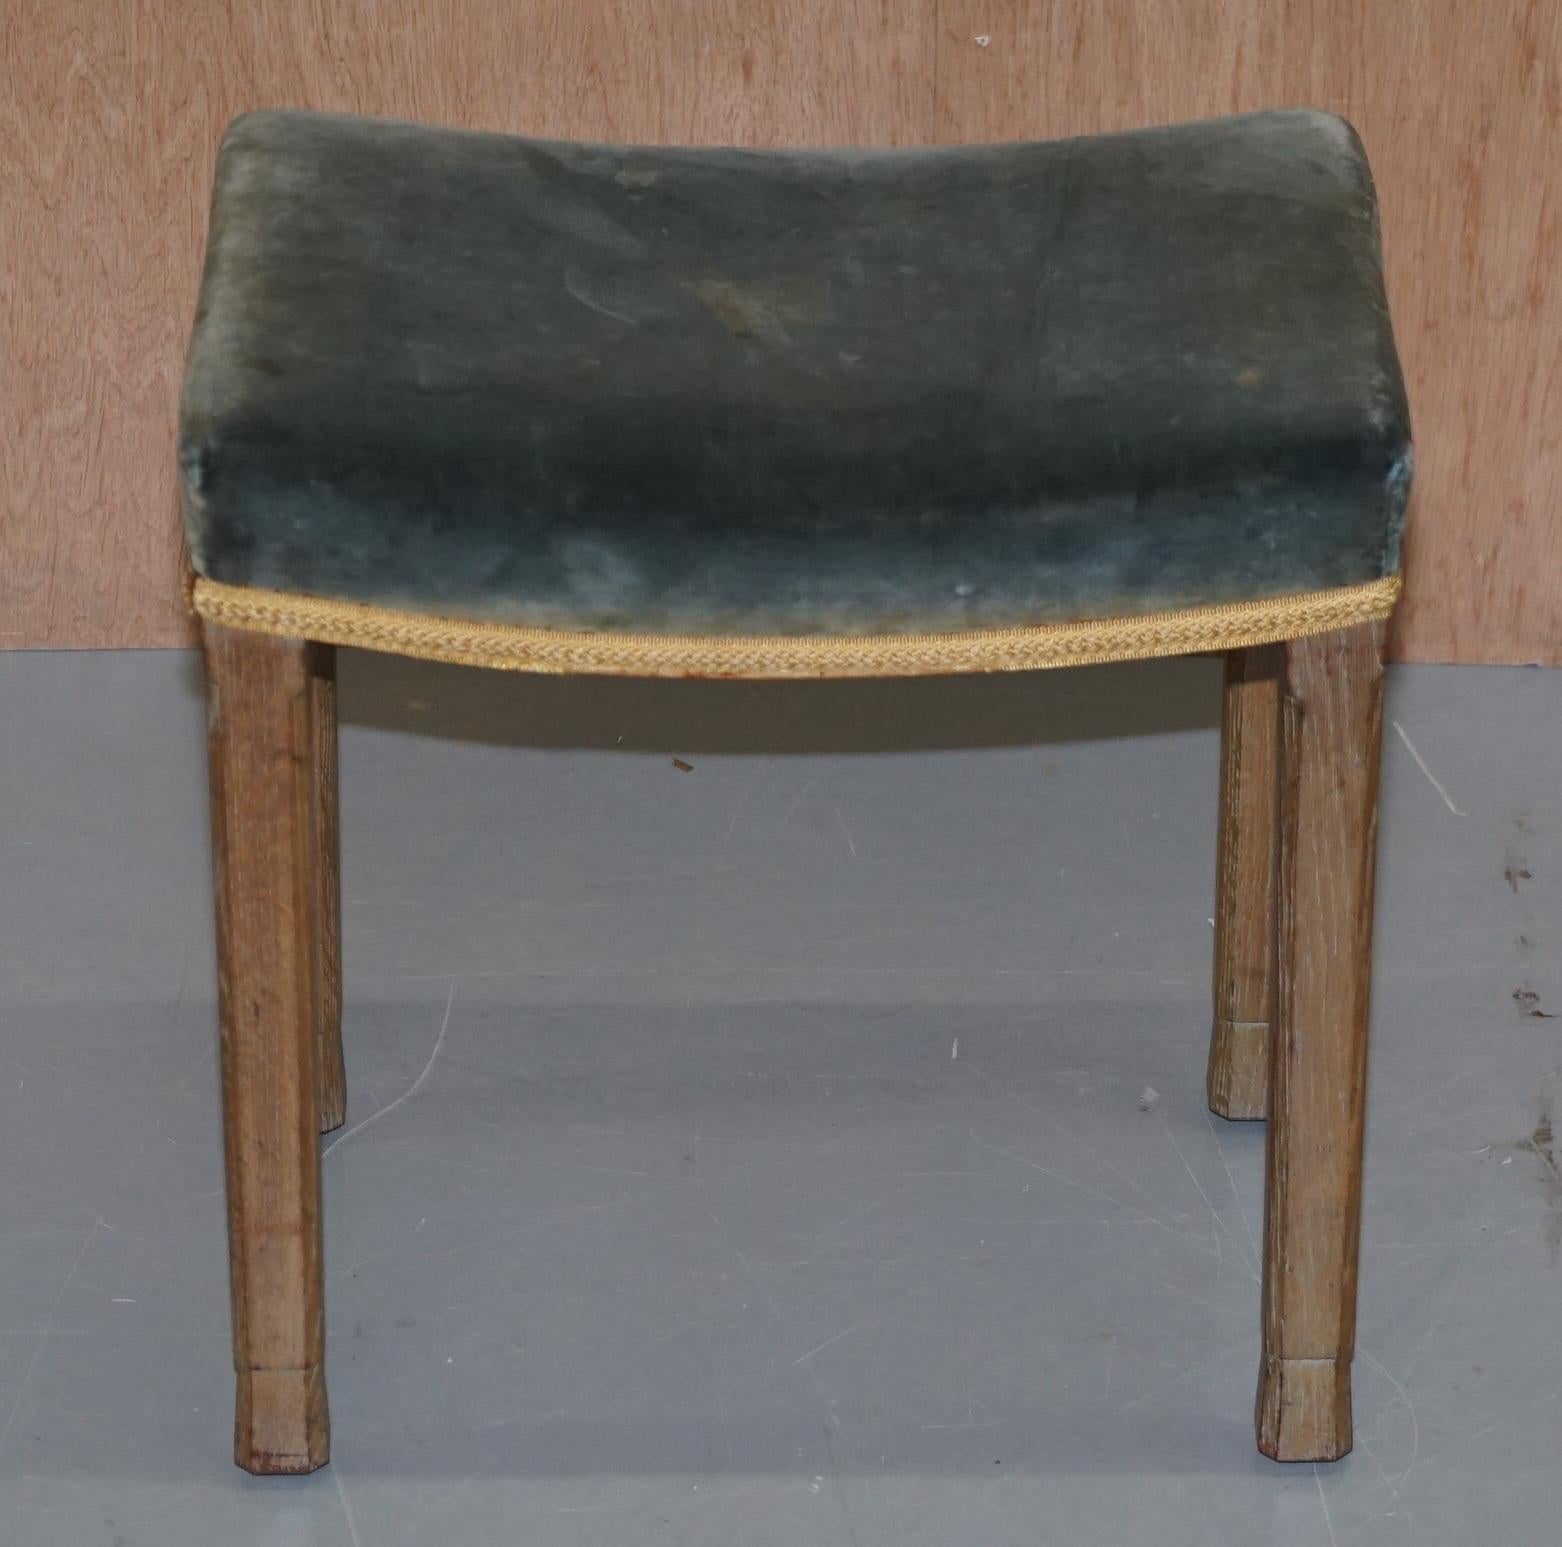 We are delighted to offer for sale this lovely and highly collectable ER II 1953 Queen Elizabeth II Coronation stool with regal velvet upholstery

A very good looking and well-made piece, custom made for the Queen's coronation, there was a limited